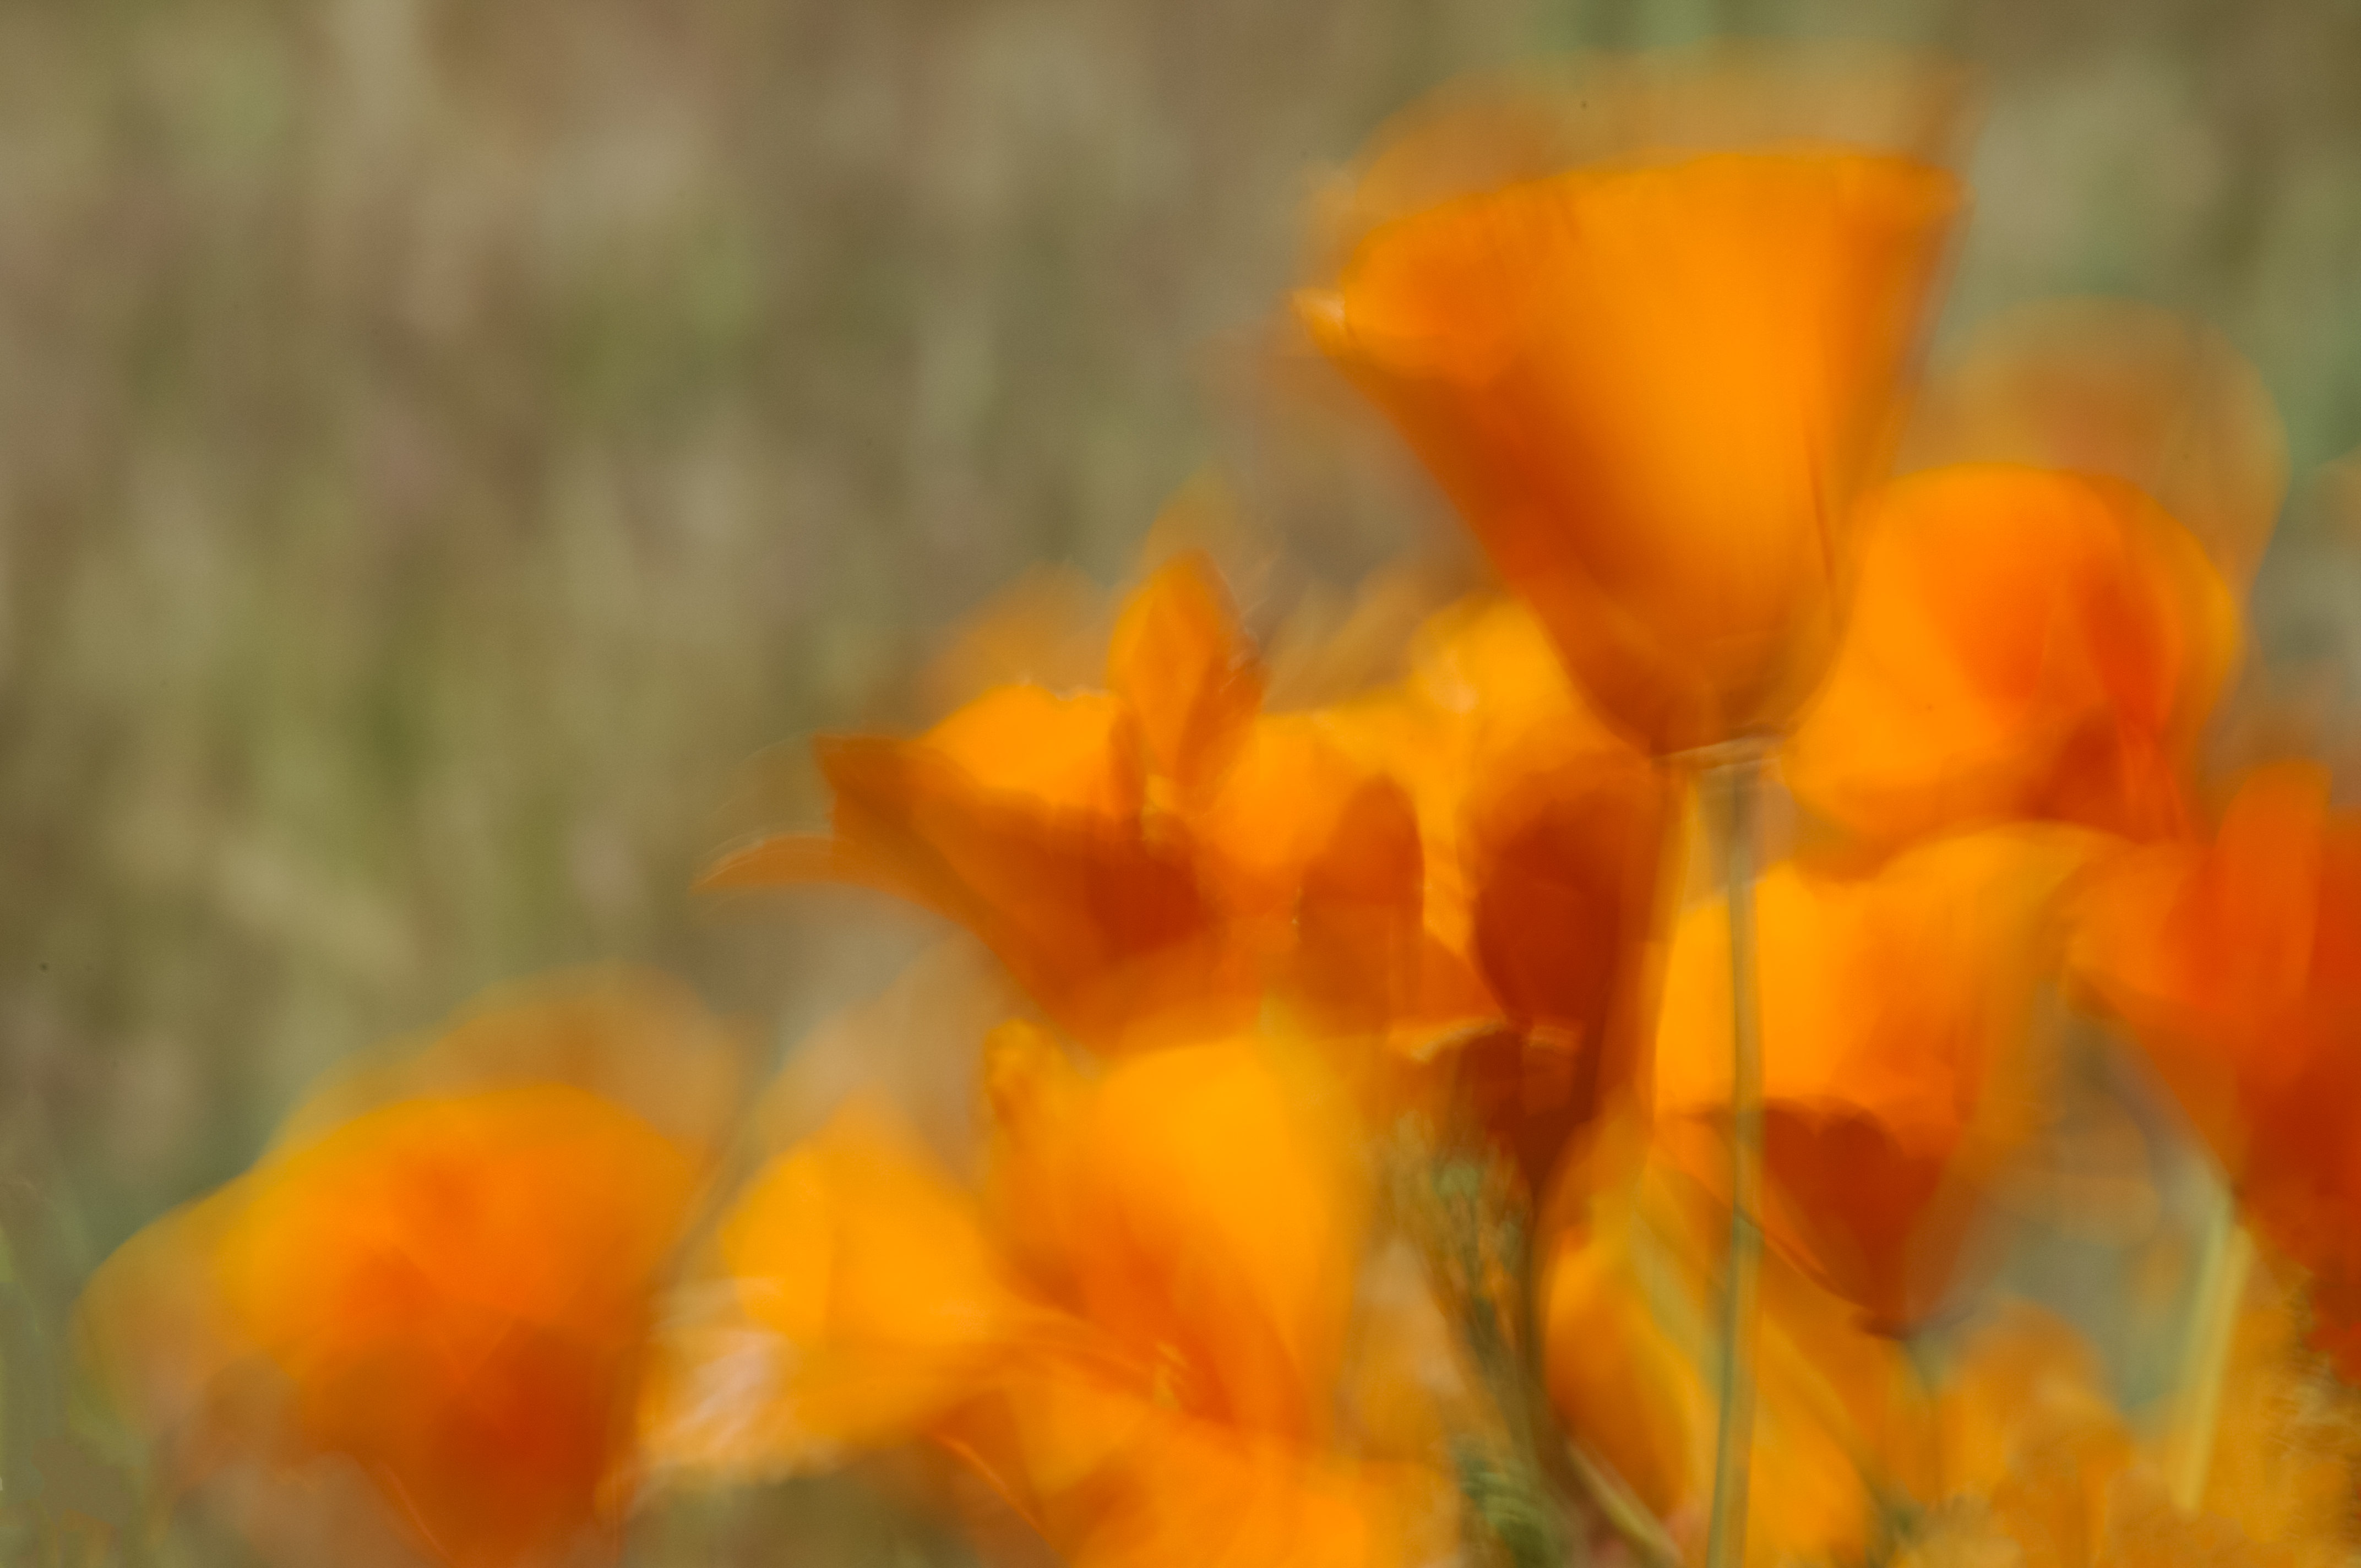 California poppies blurred due to wind during exposure